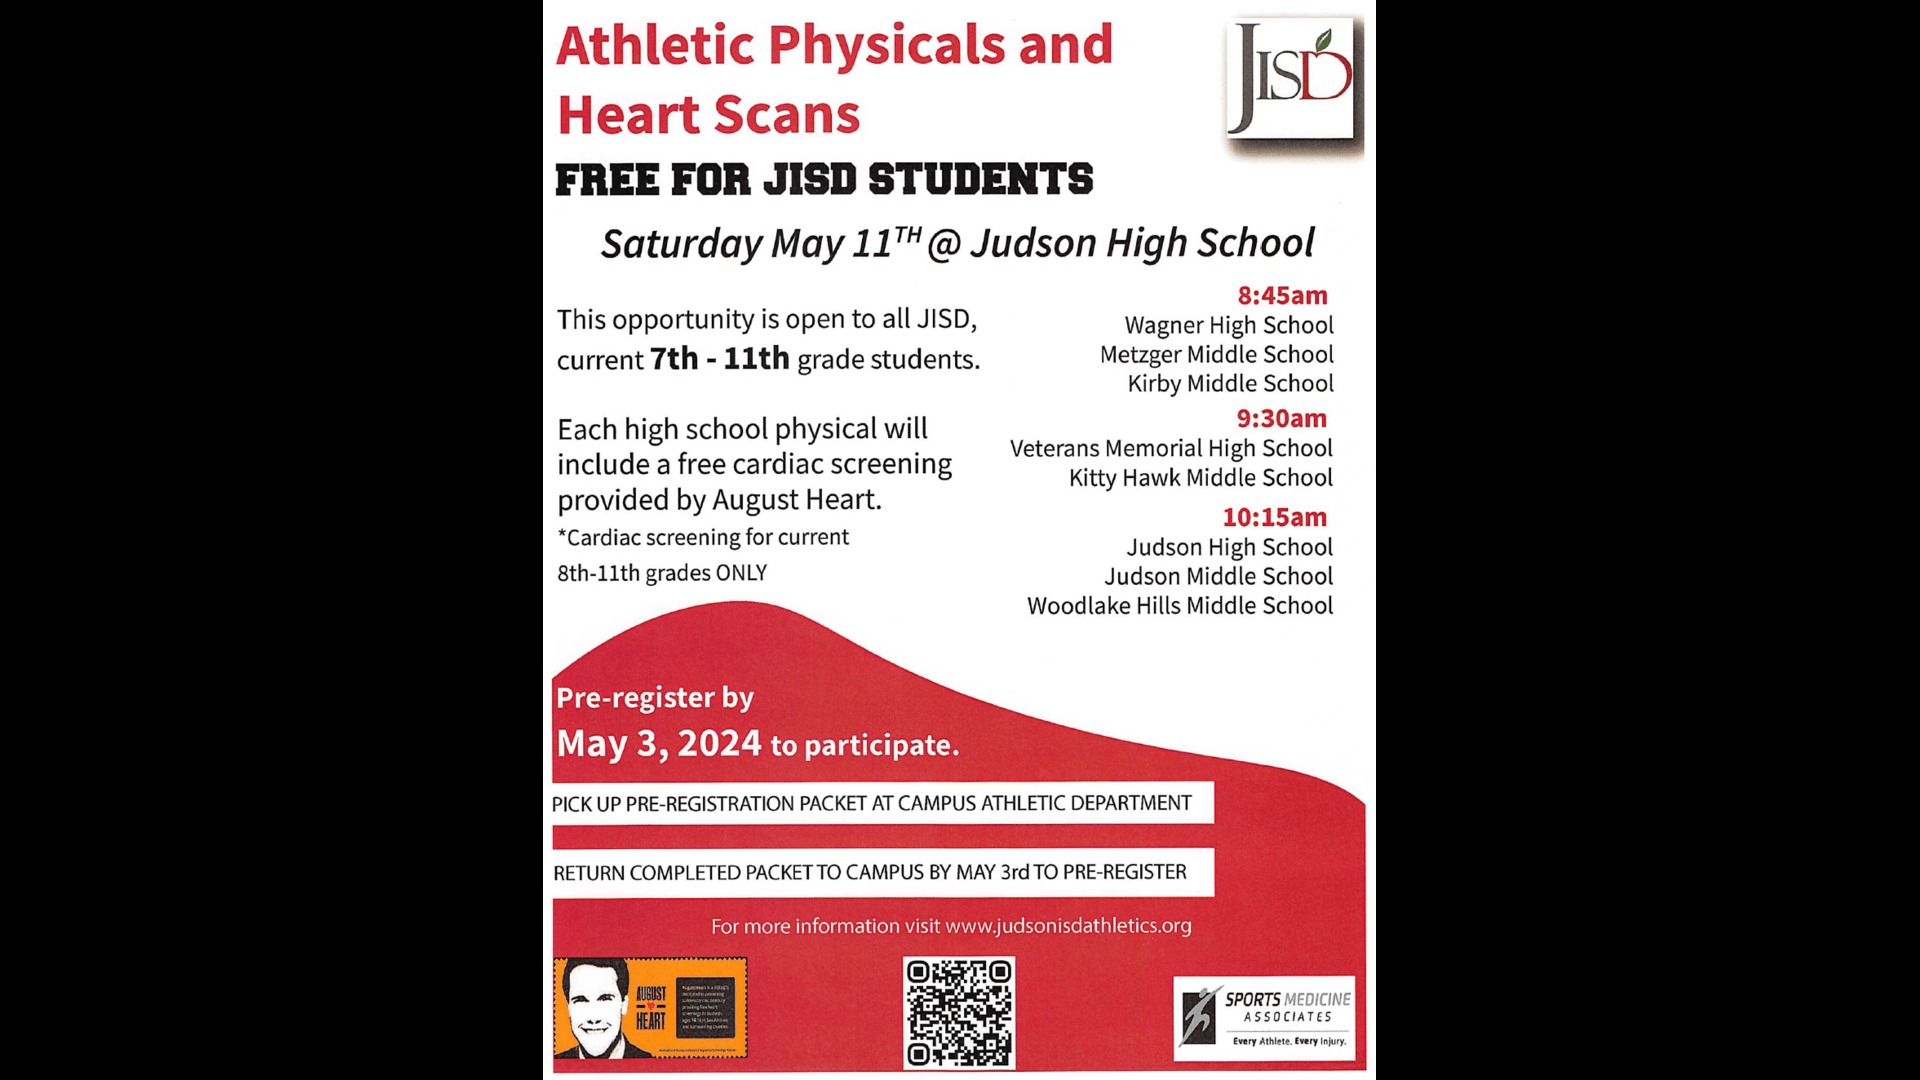 Judson ISDSlide 2 - Athletic Physicals - May 11th.